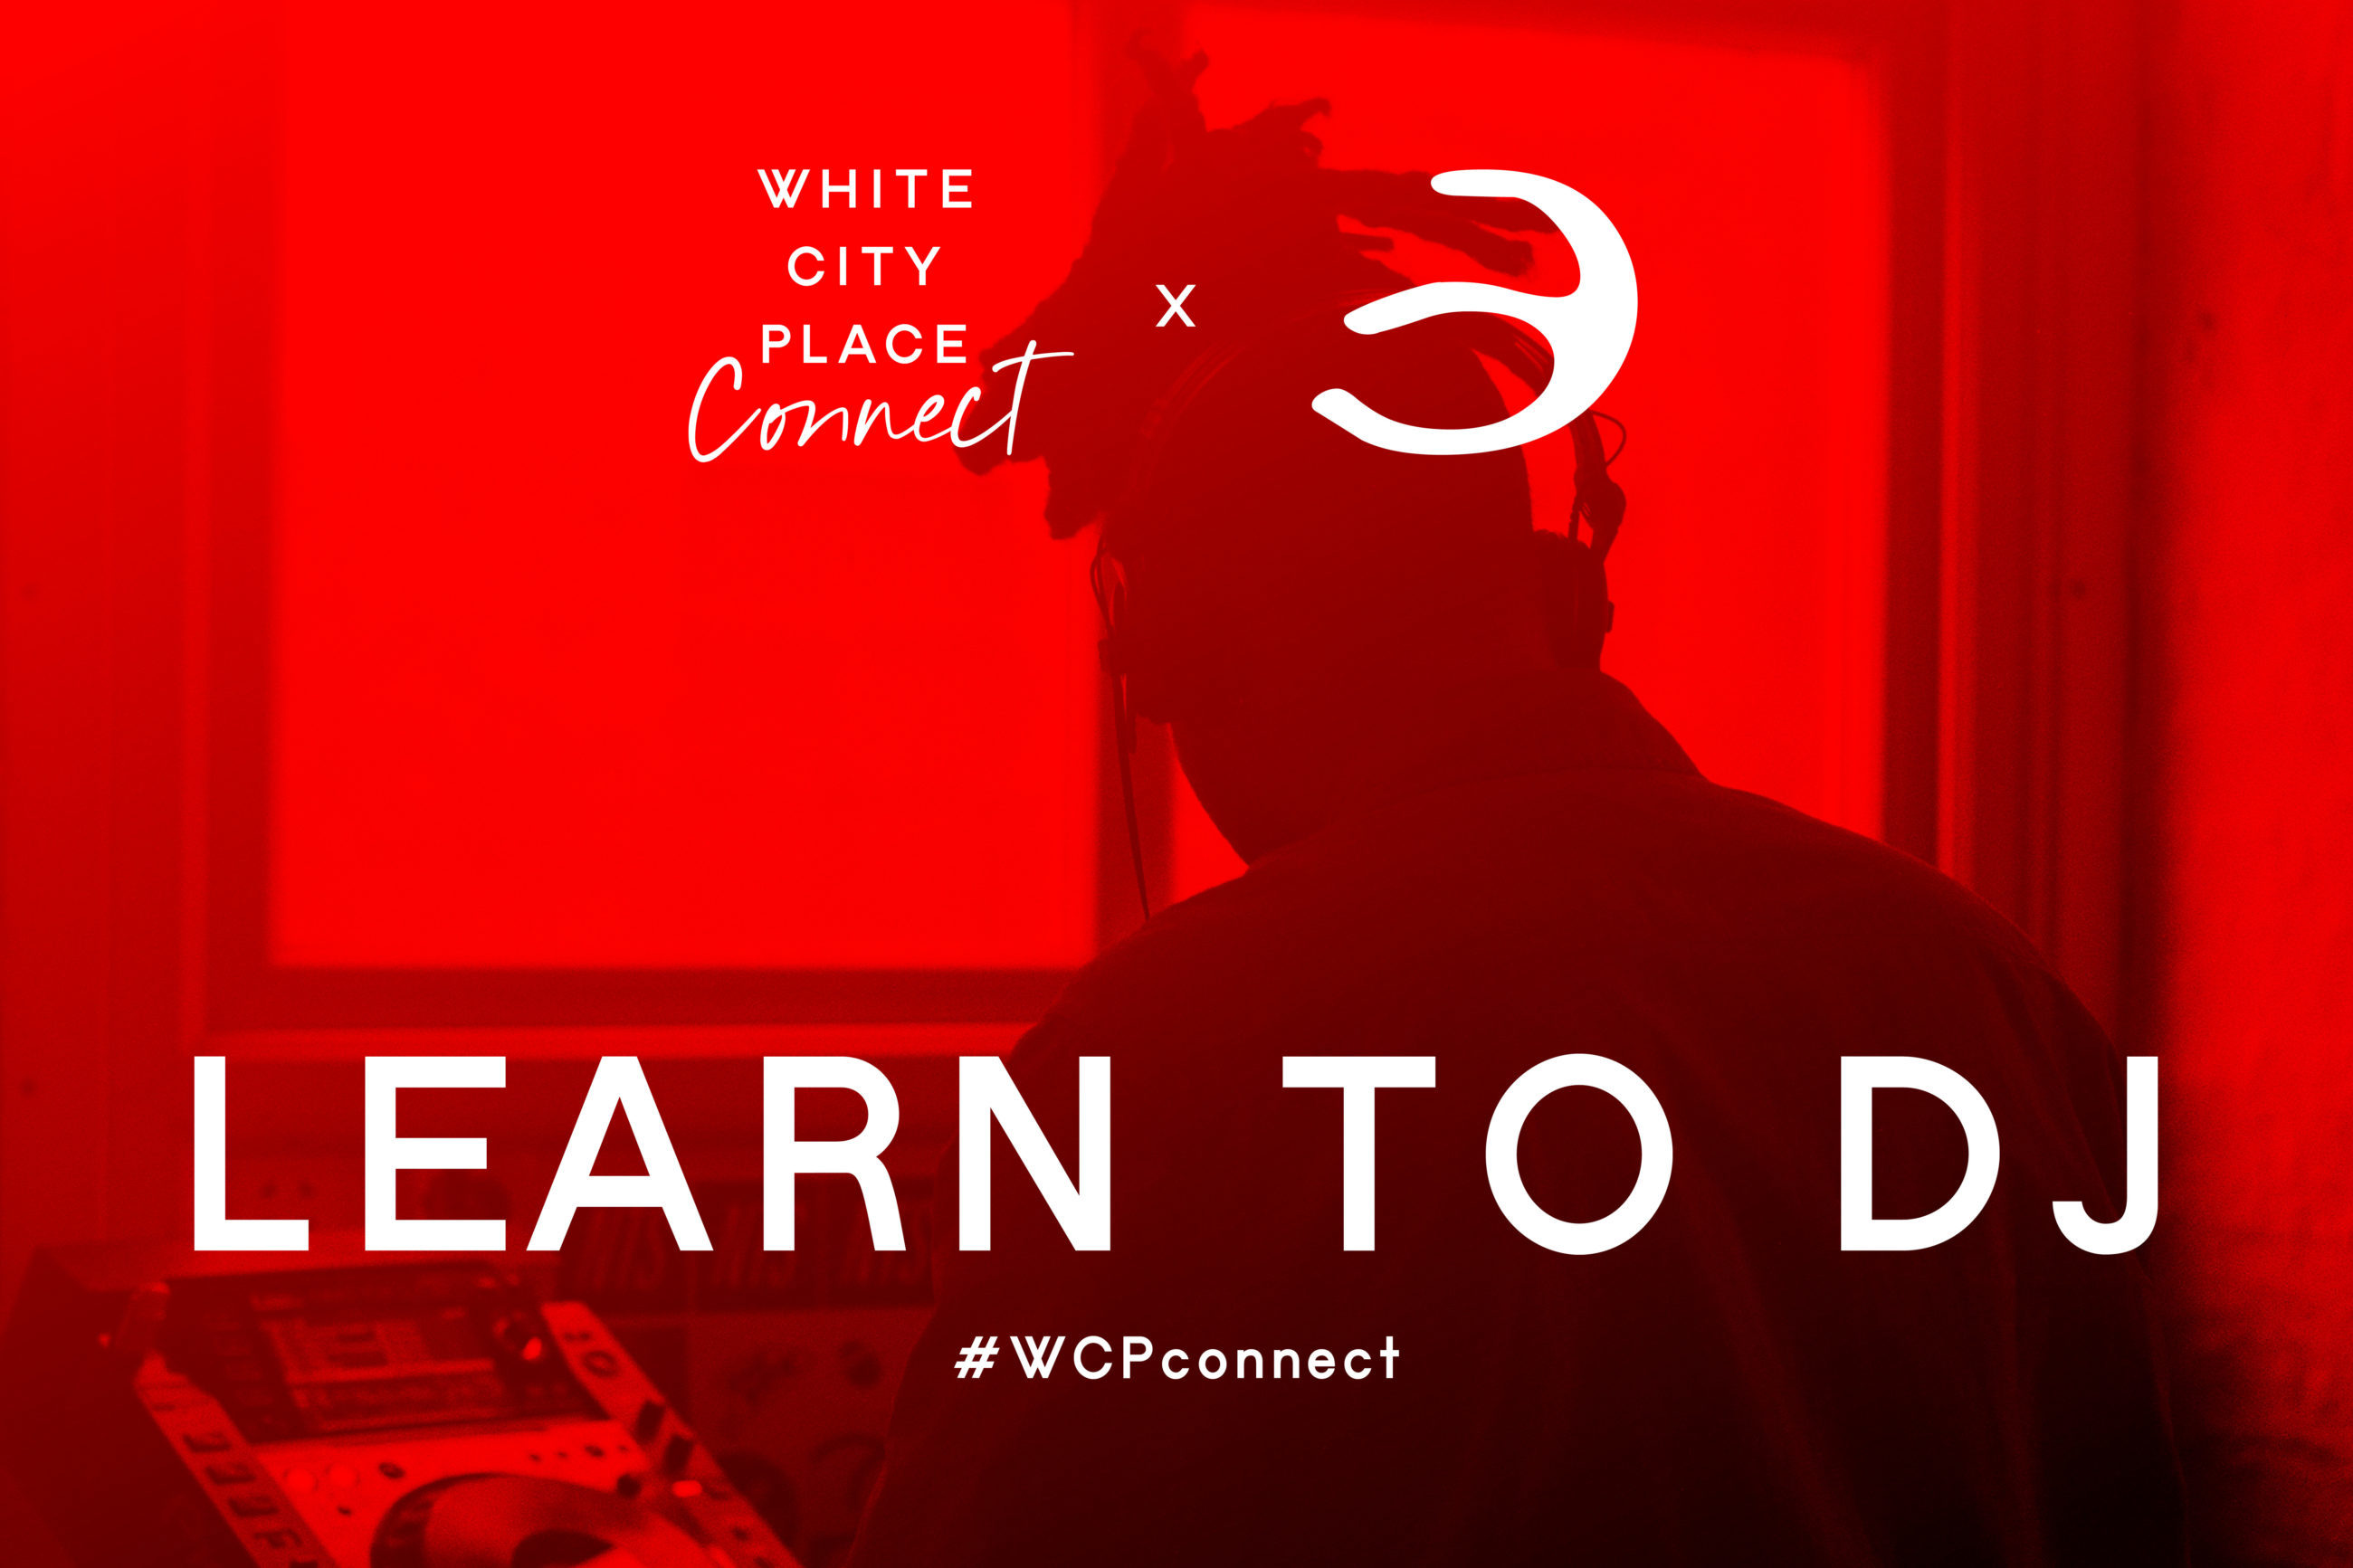 White City Place Connect: Learn to DJ Feature Image